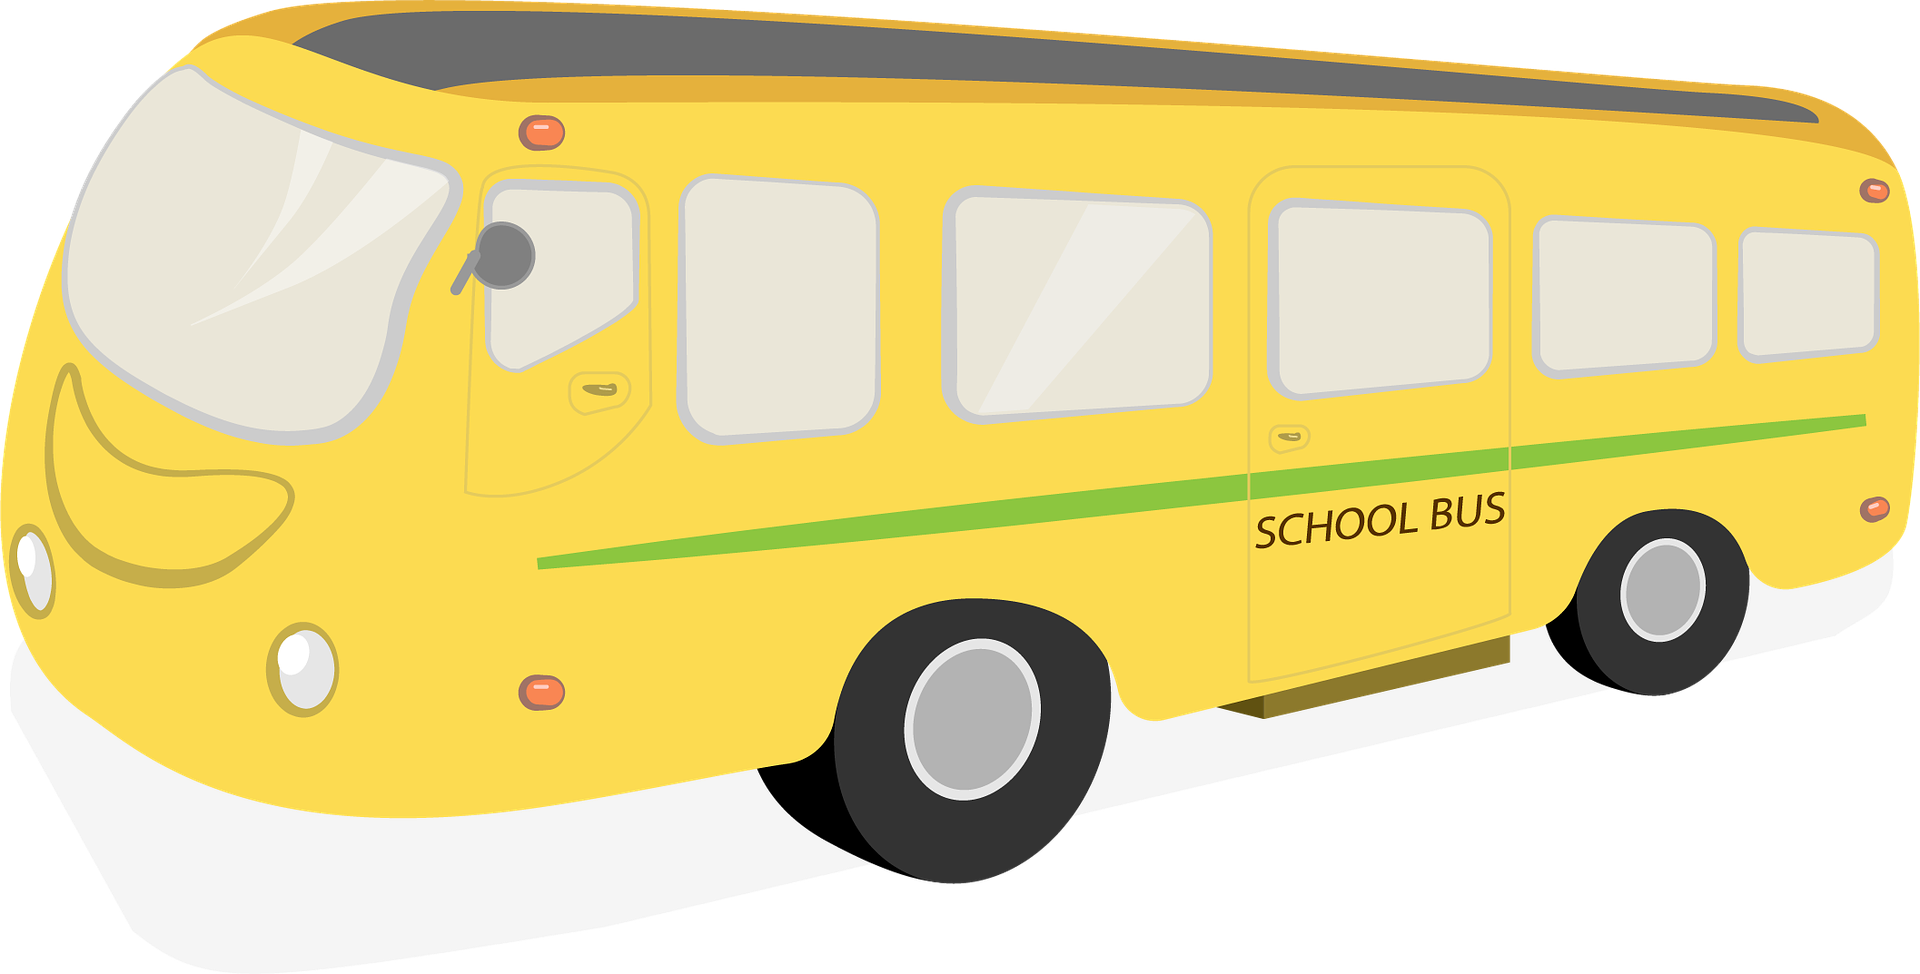 bus-2840336_1920.png